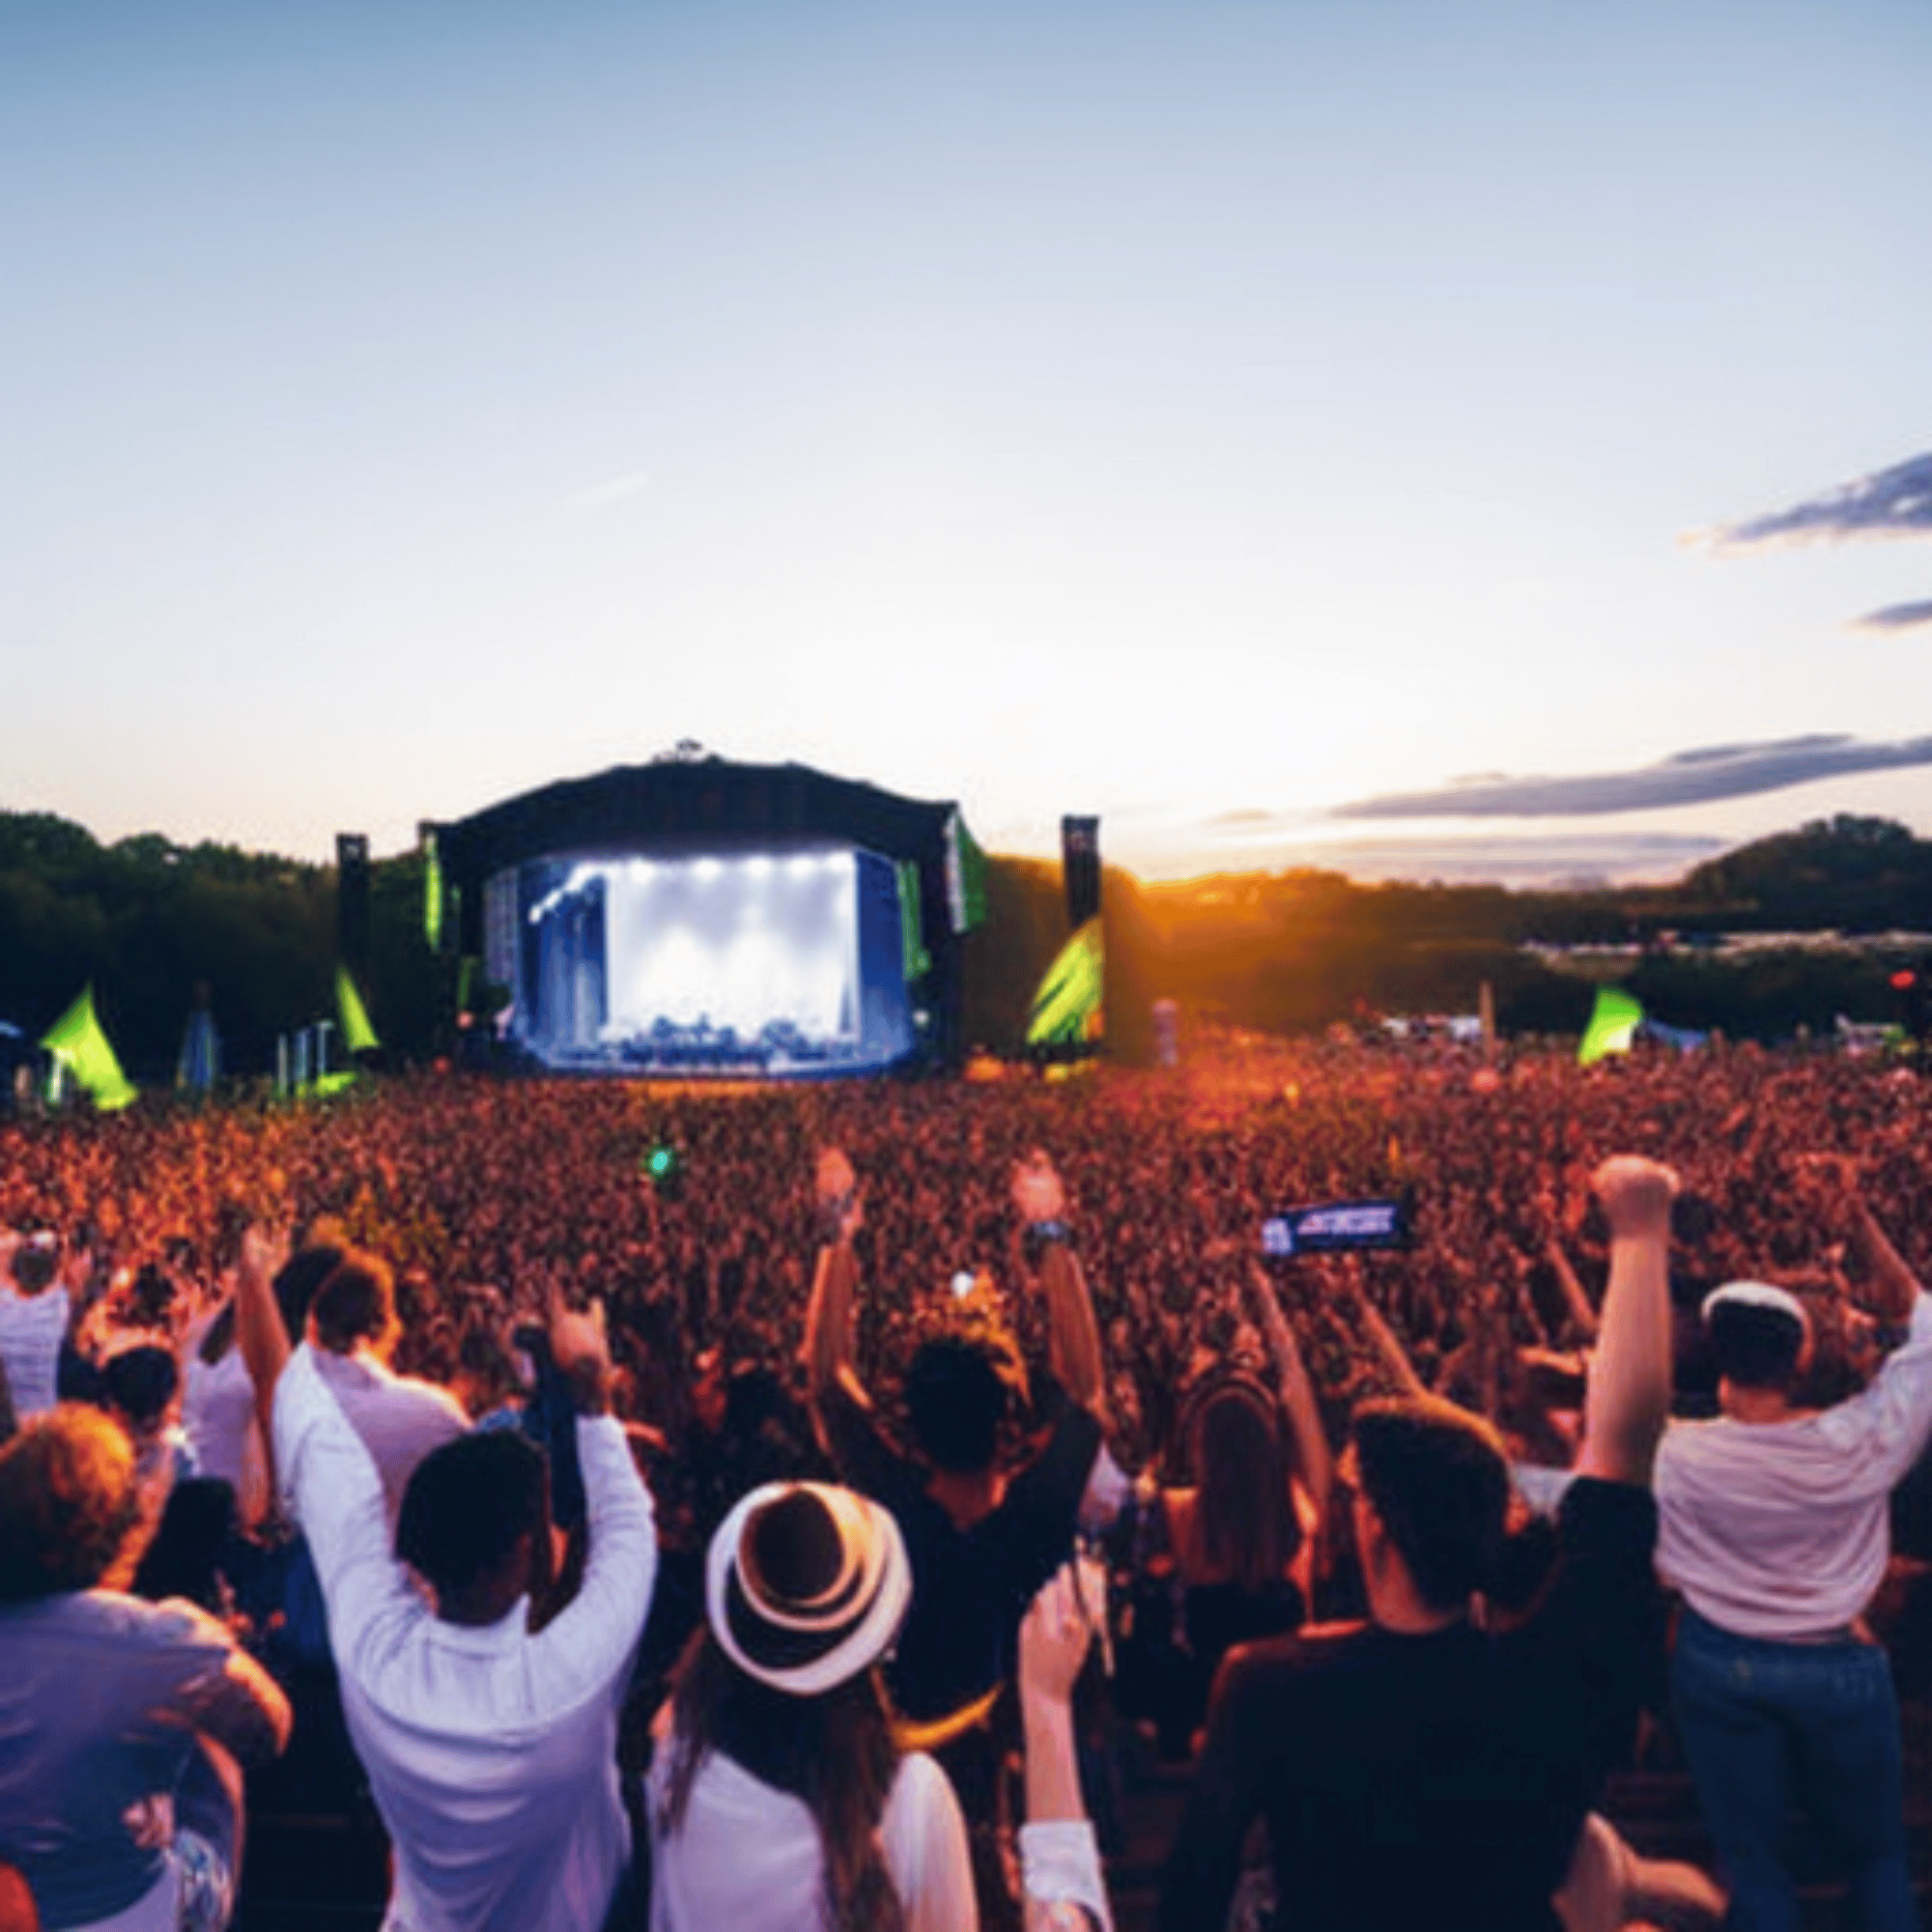 A crowd of people with their hands in the air, cheering and celebrating at a live music festival